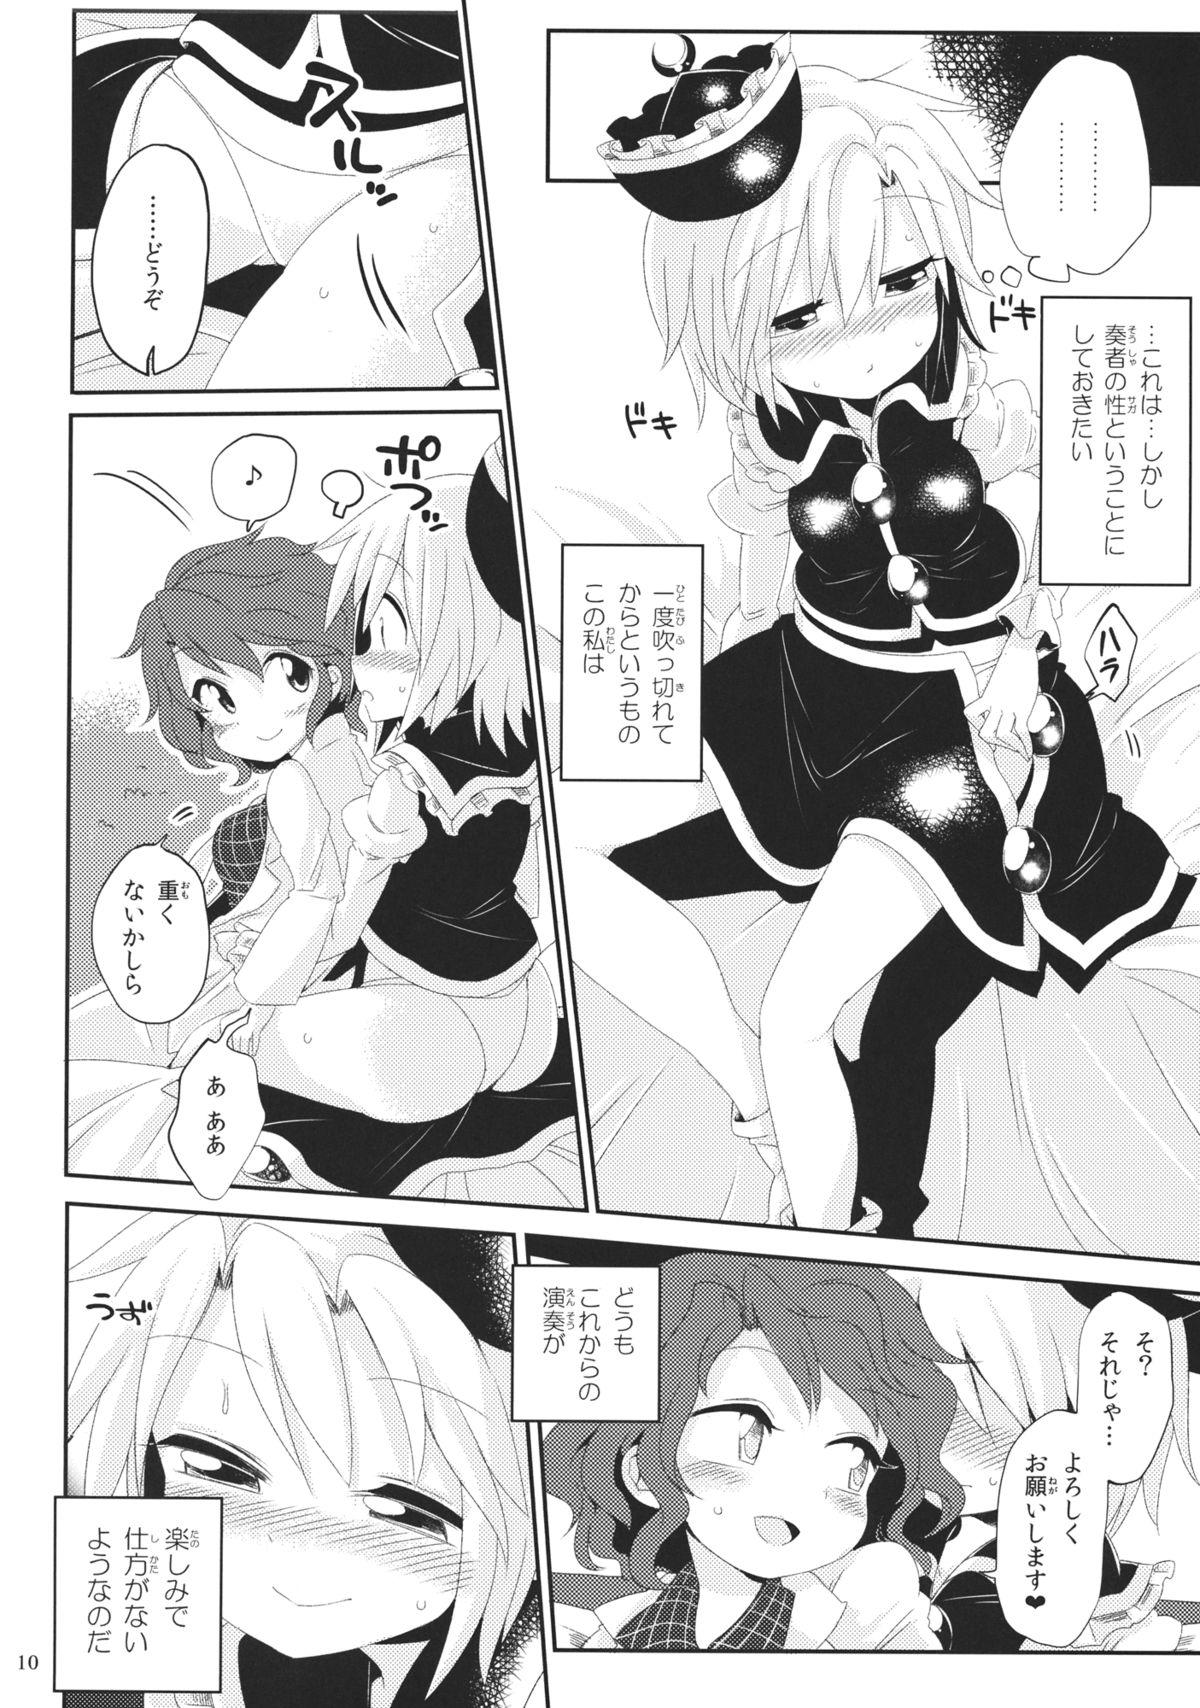 Sesso Alternate Modulation - Touhou project Polla - Page 9